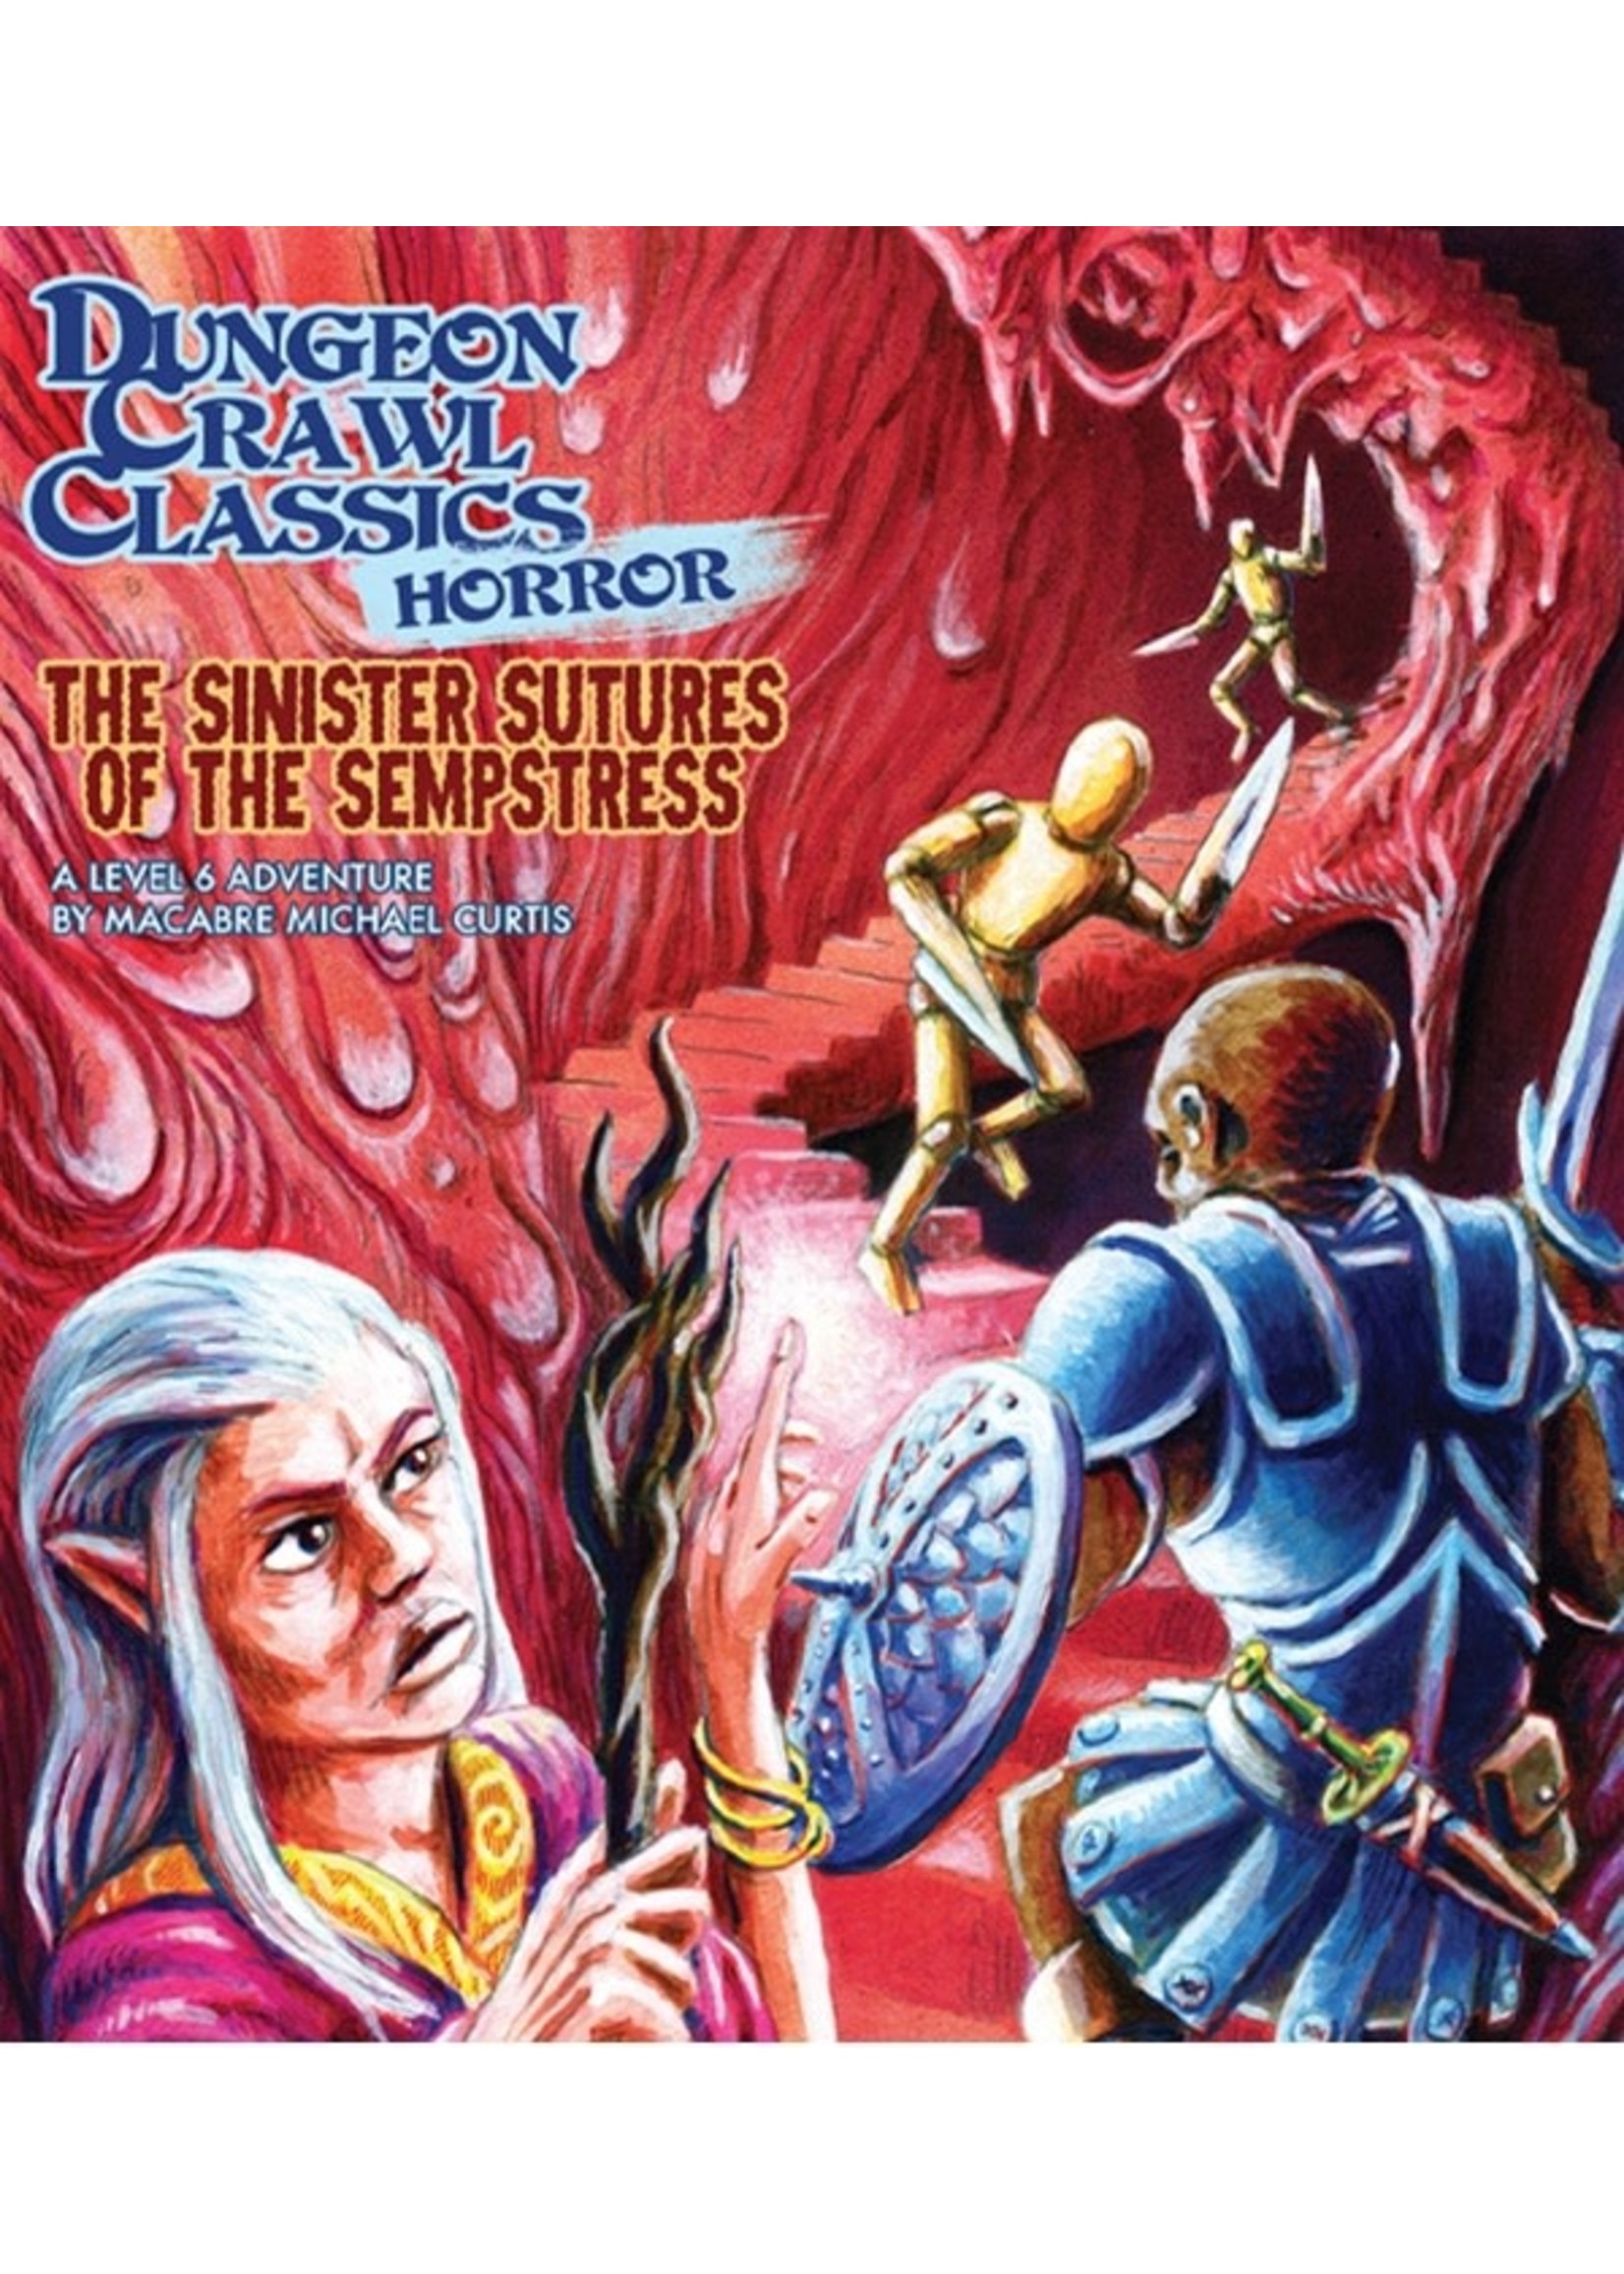 Goodman Games Dungeon Crawl Classics: The Sinister Sutures of the Sempstress (Horror #2)